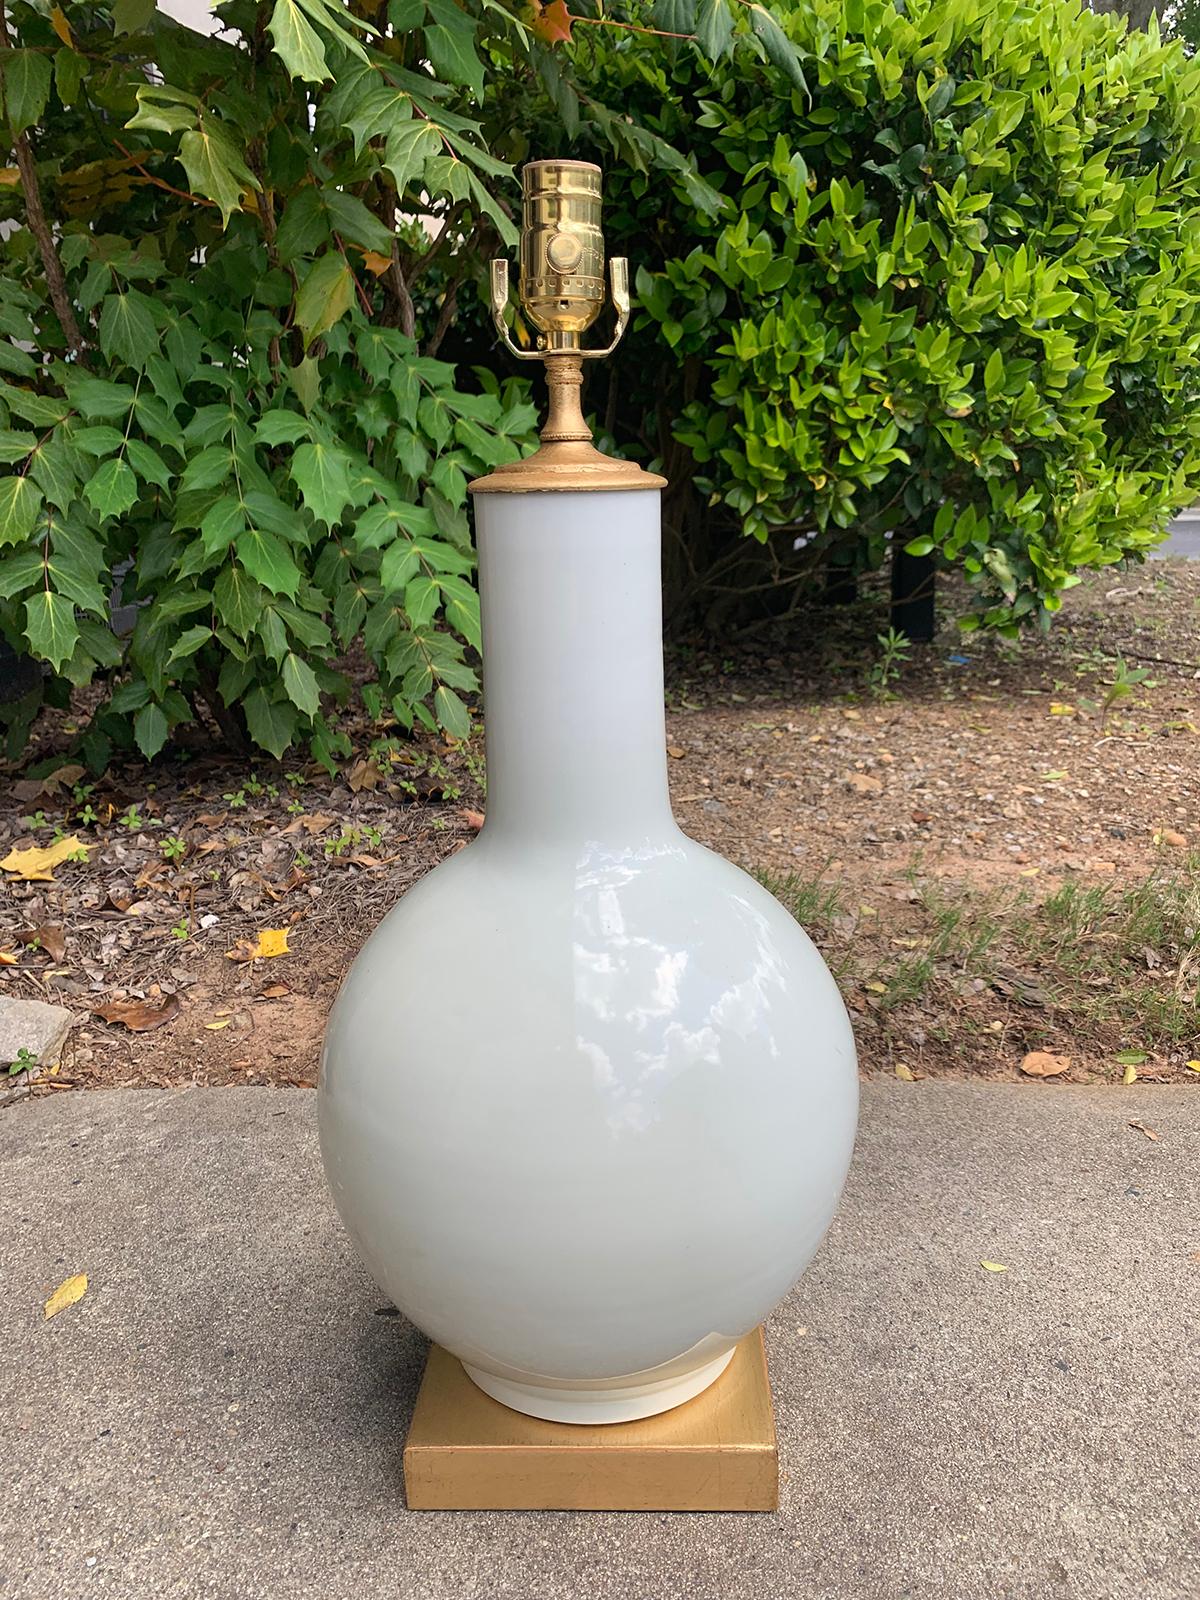 Mid-20th century Asian white porcelain lamp with custom giltwood base
Brand new wiring
Measures: 10.5